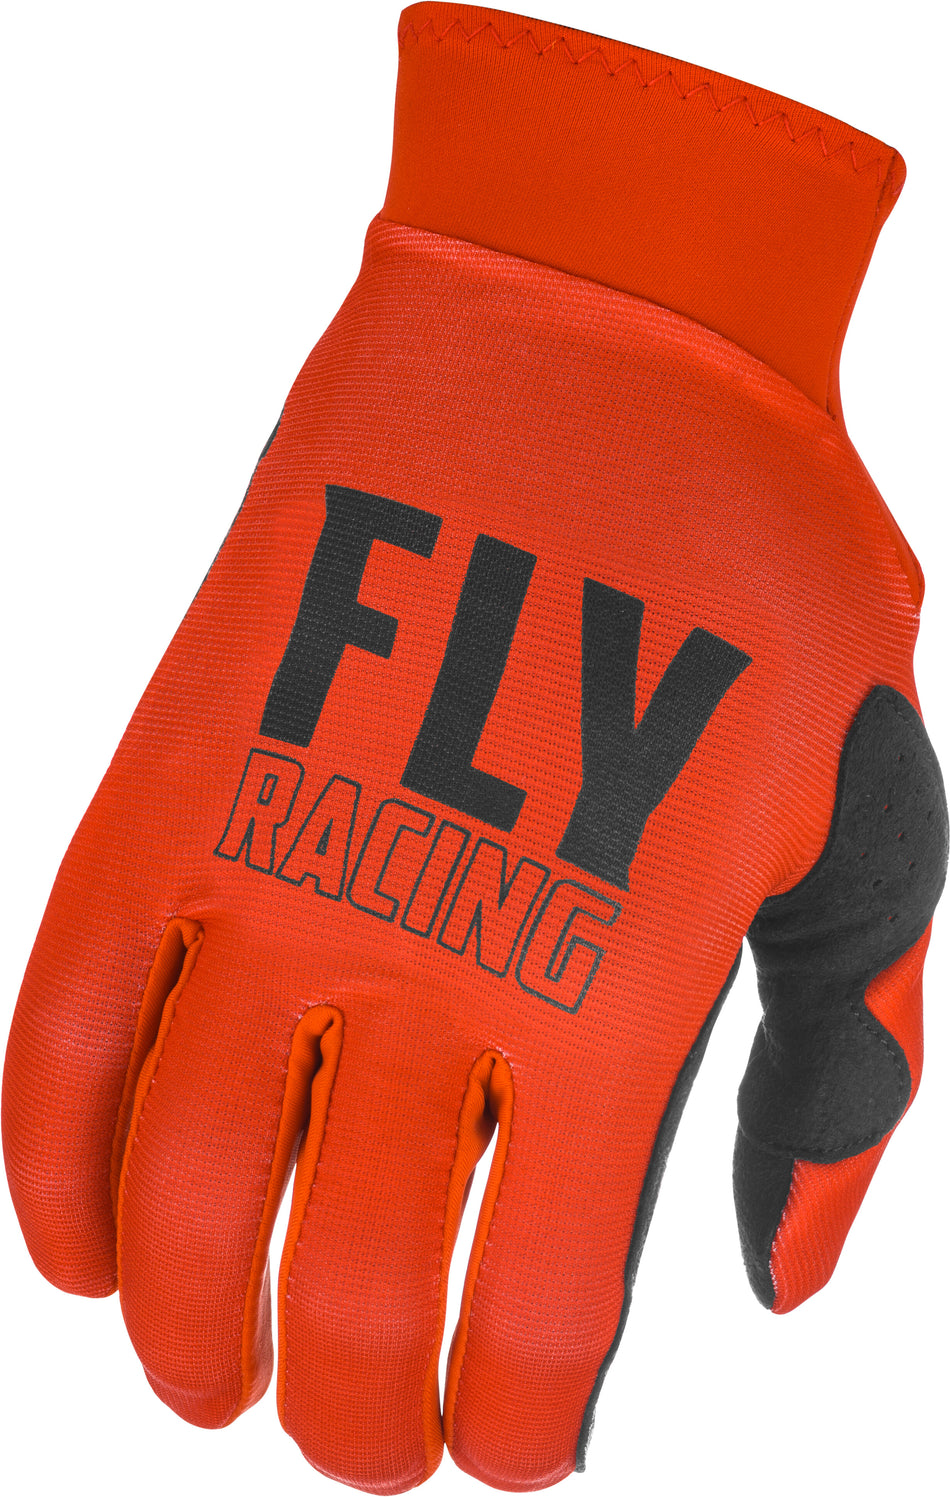 FLY RACING Pro Lite Gloves Red/Black Md 374-852M